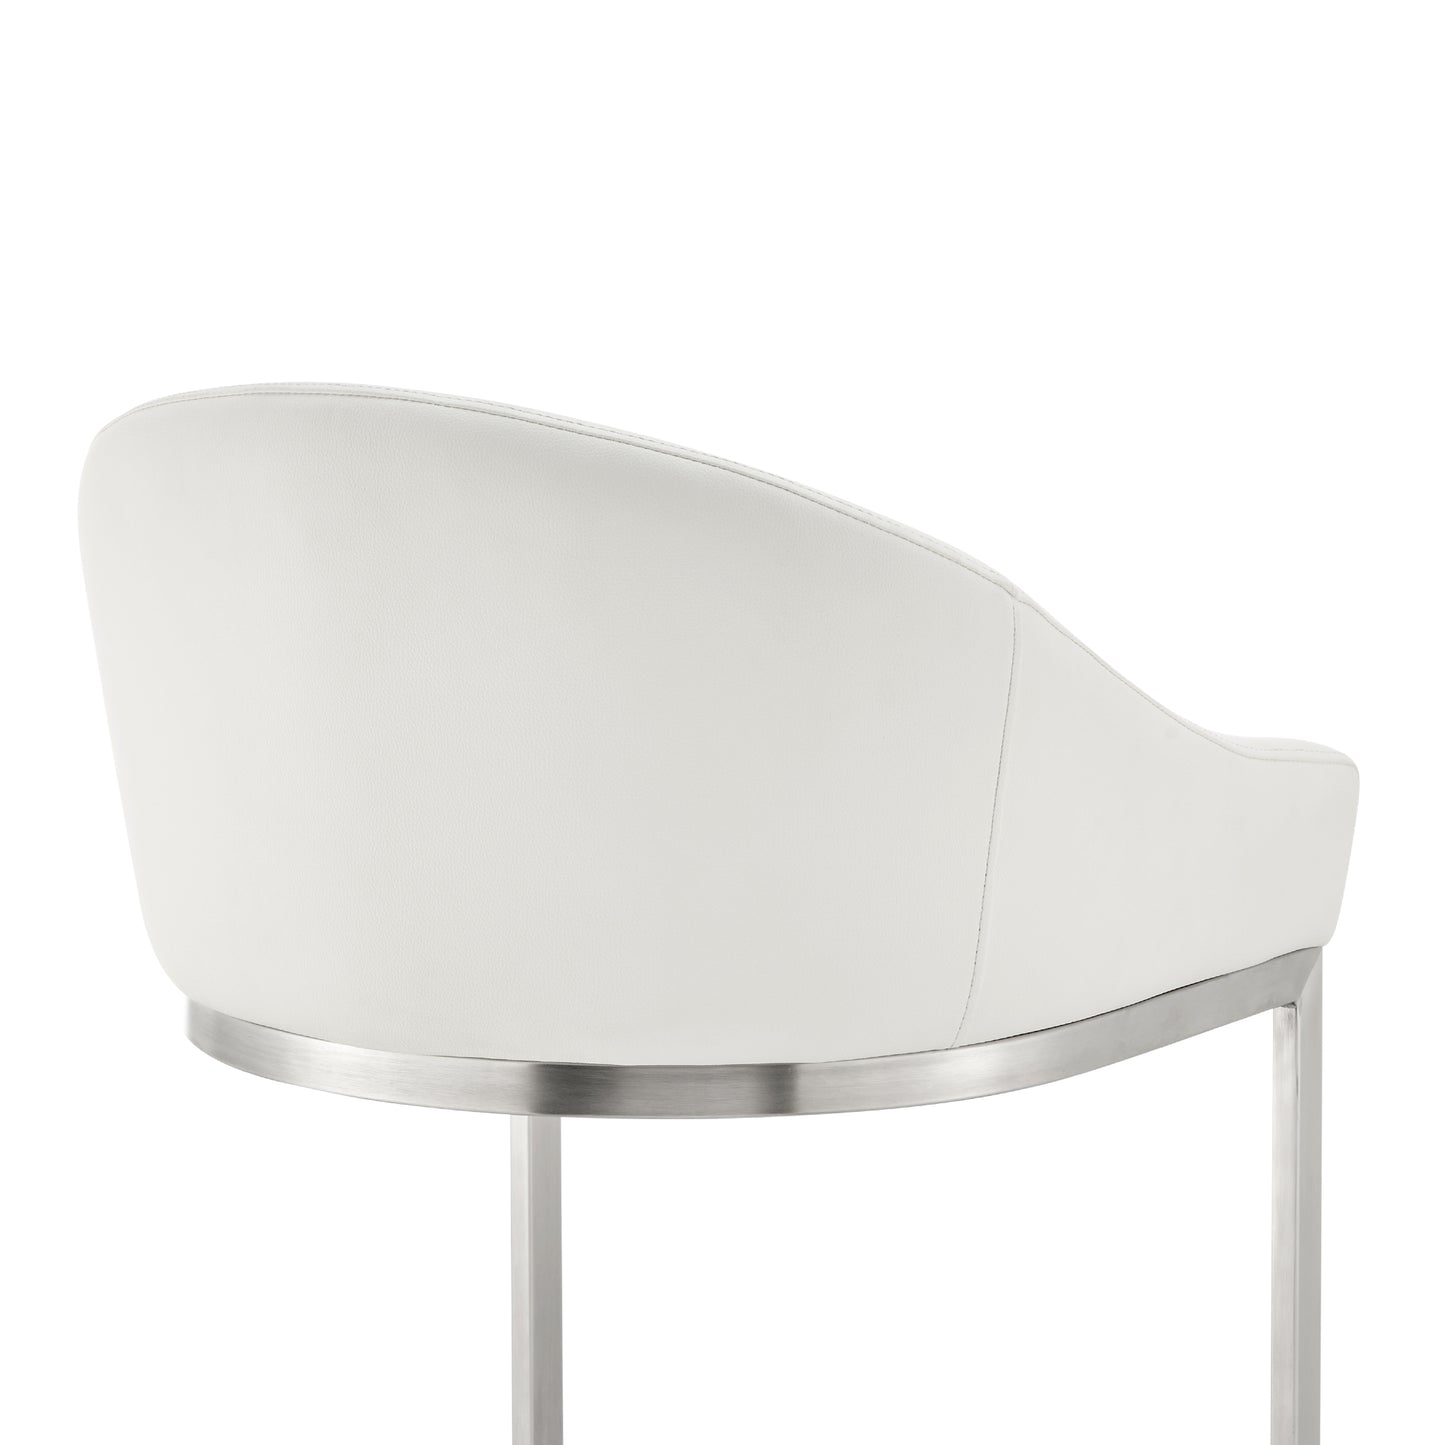 Katherine 26" Counter Stool in Brushed Stainless Steel with White Faux Leather